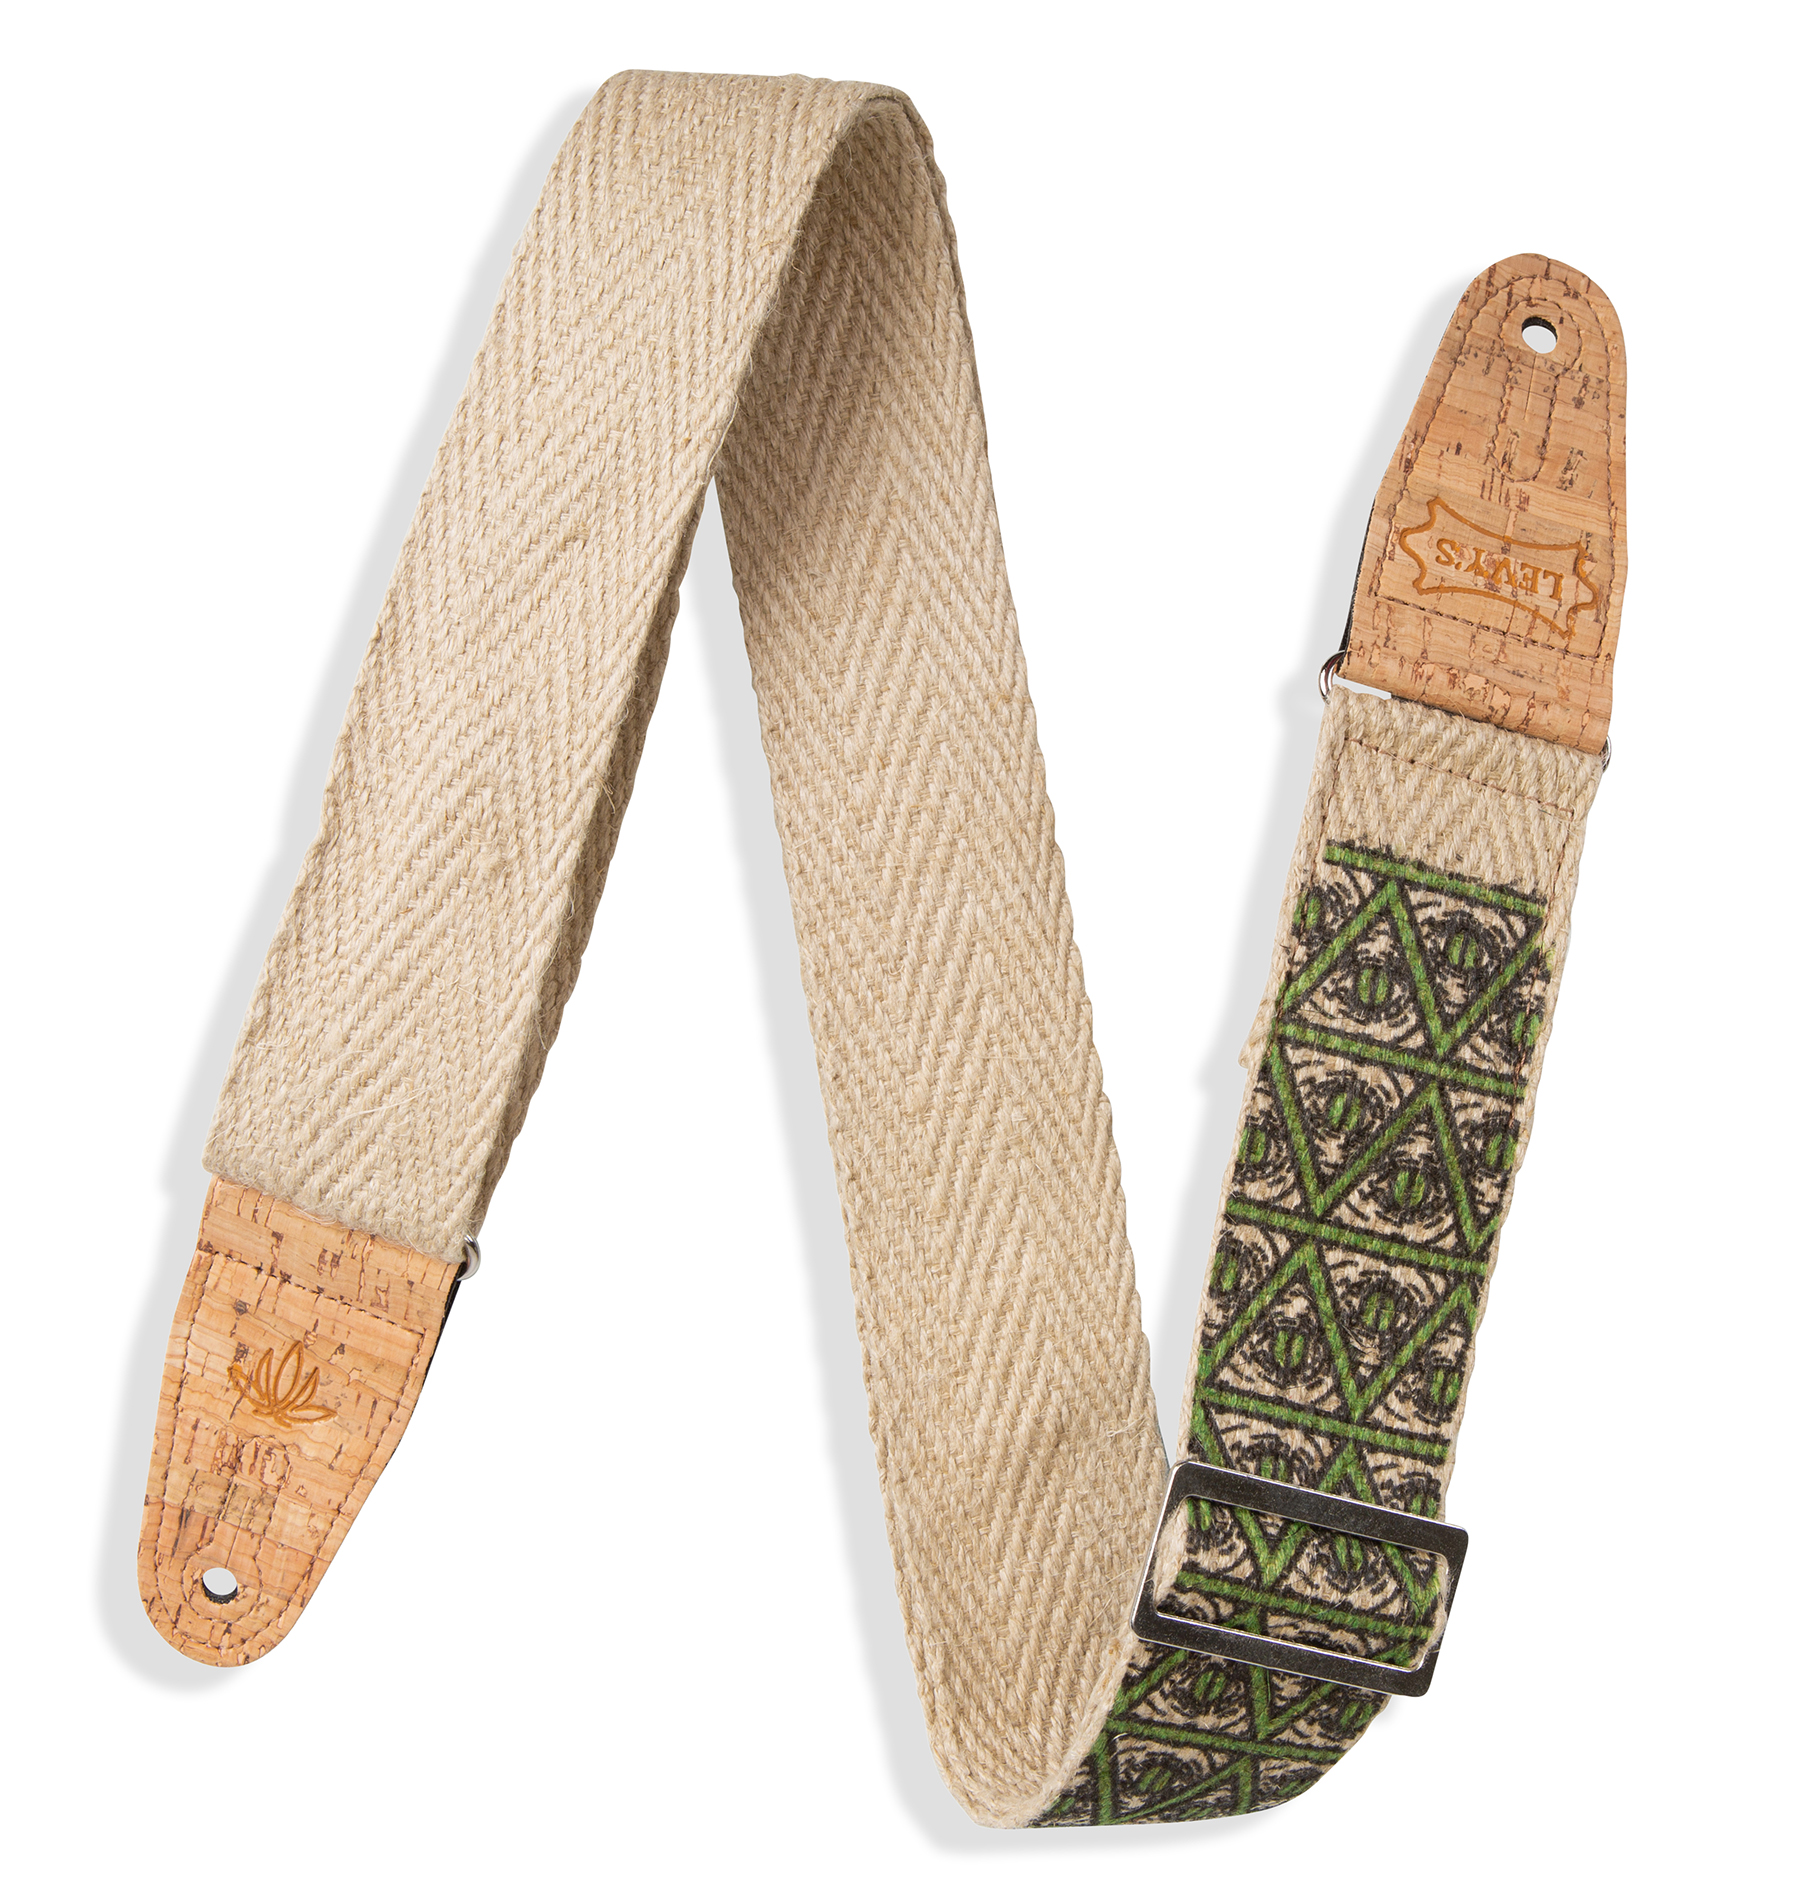 Levy's Leathers MH8P Guitar Strap - Natural Cork Ends 2" Wide